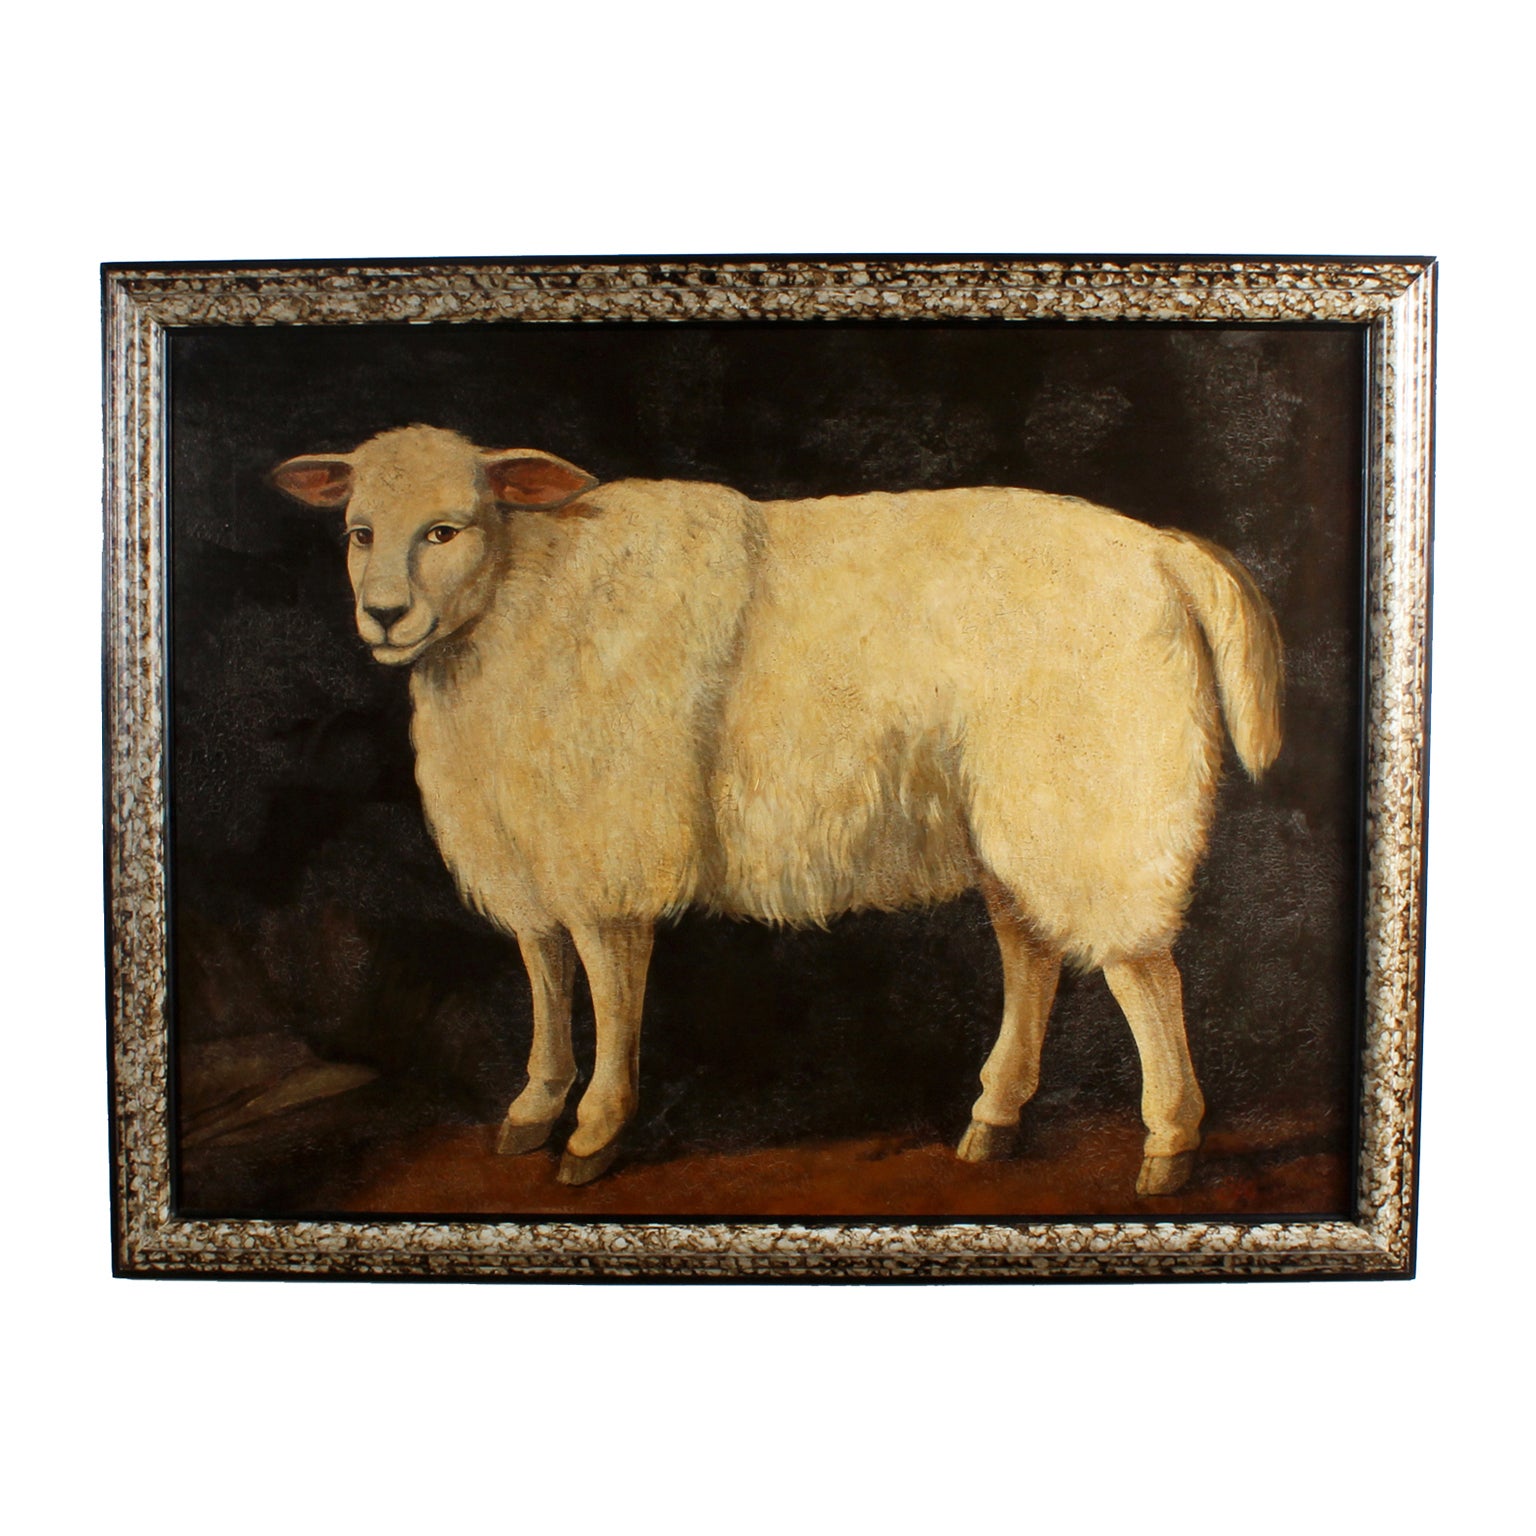 A Large Oil Painting of a Sheep by William Skilling